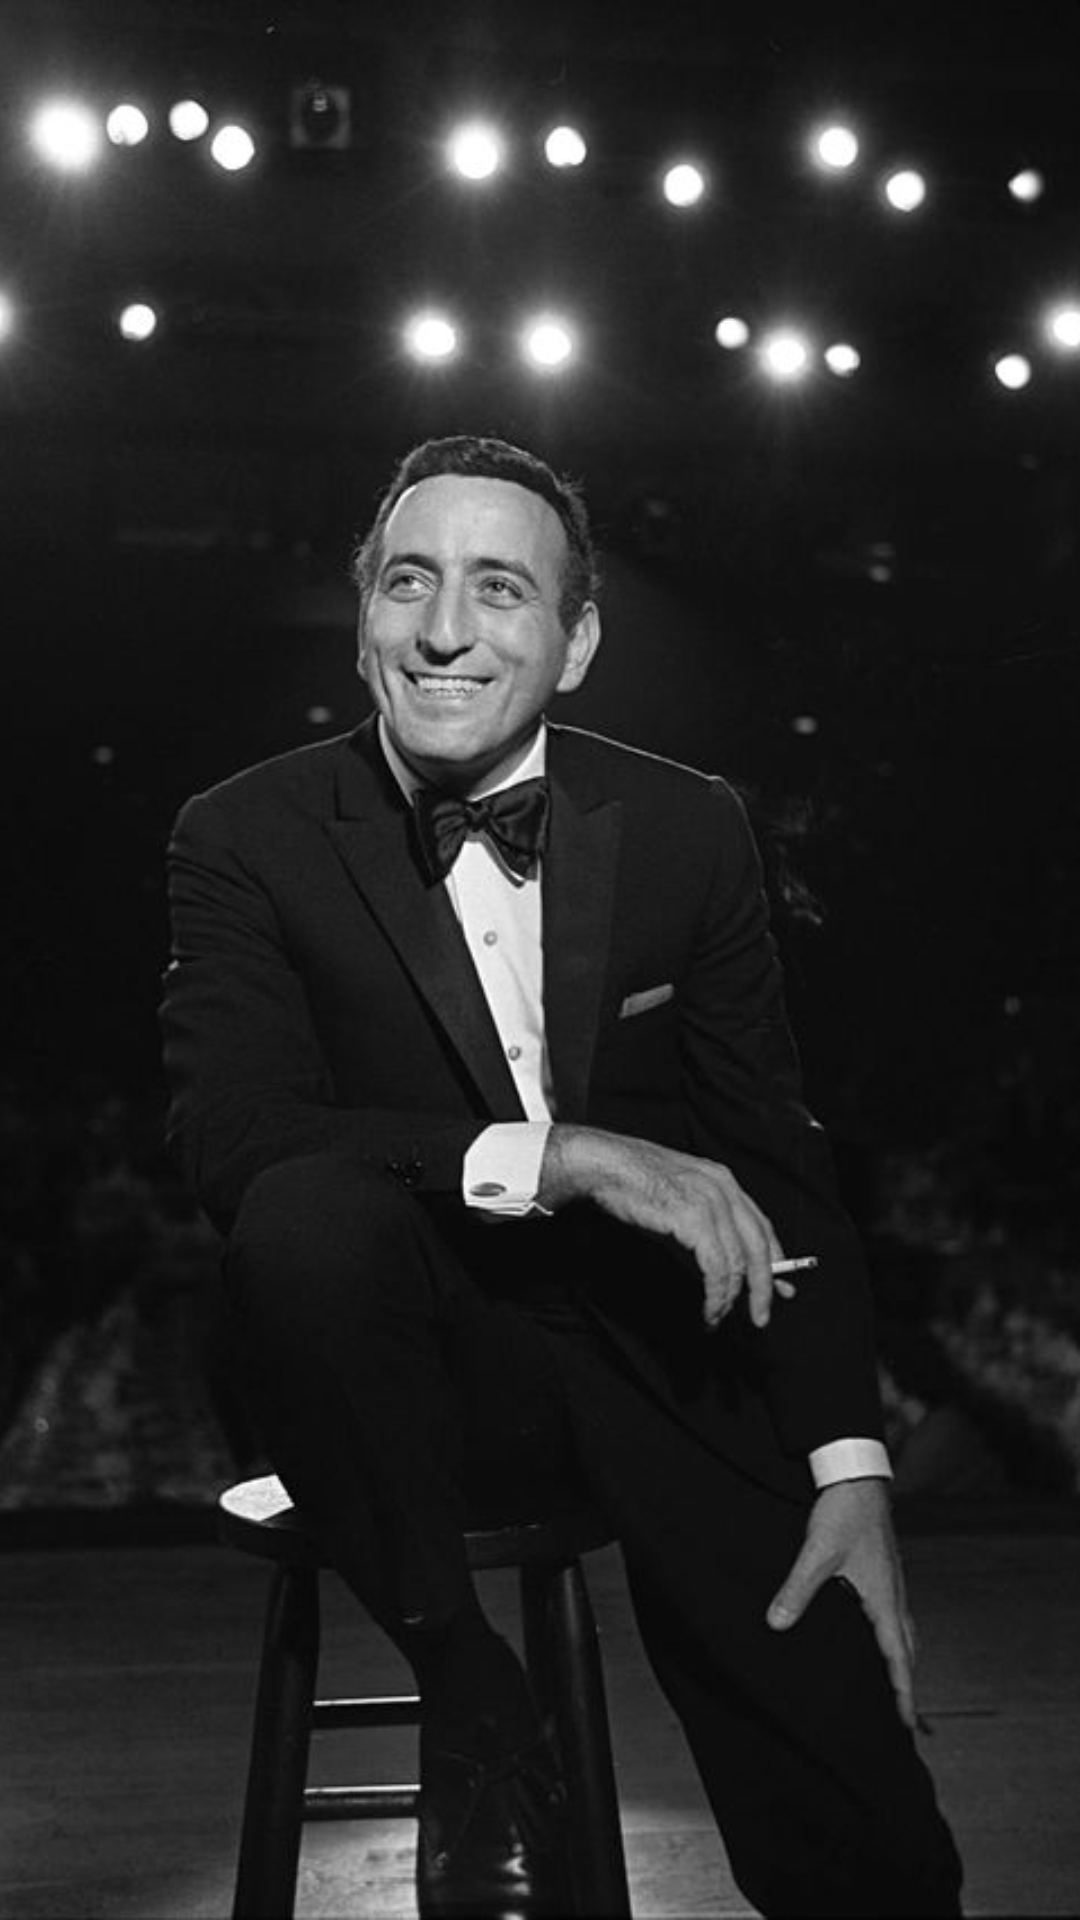 Tony Bennett songs that you must have in your playlist